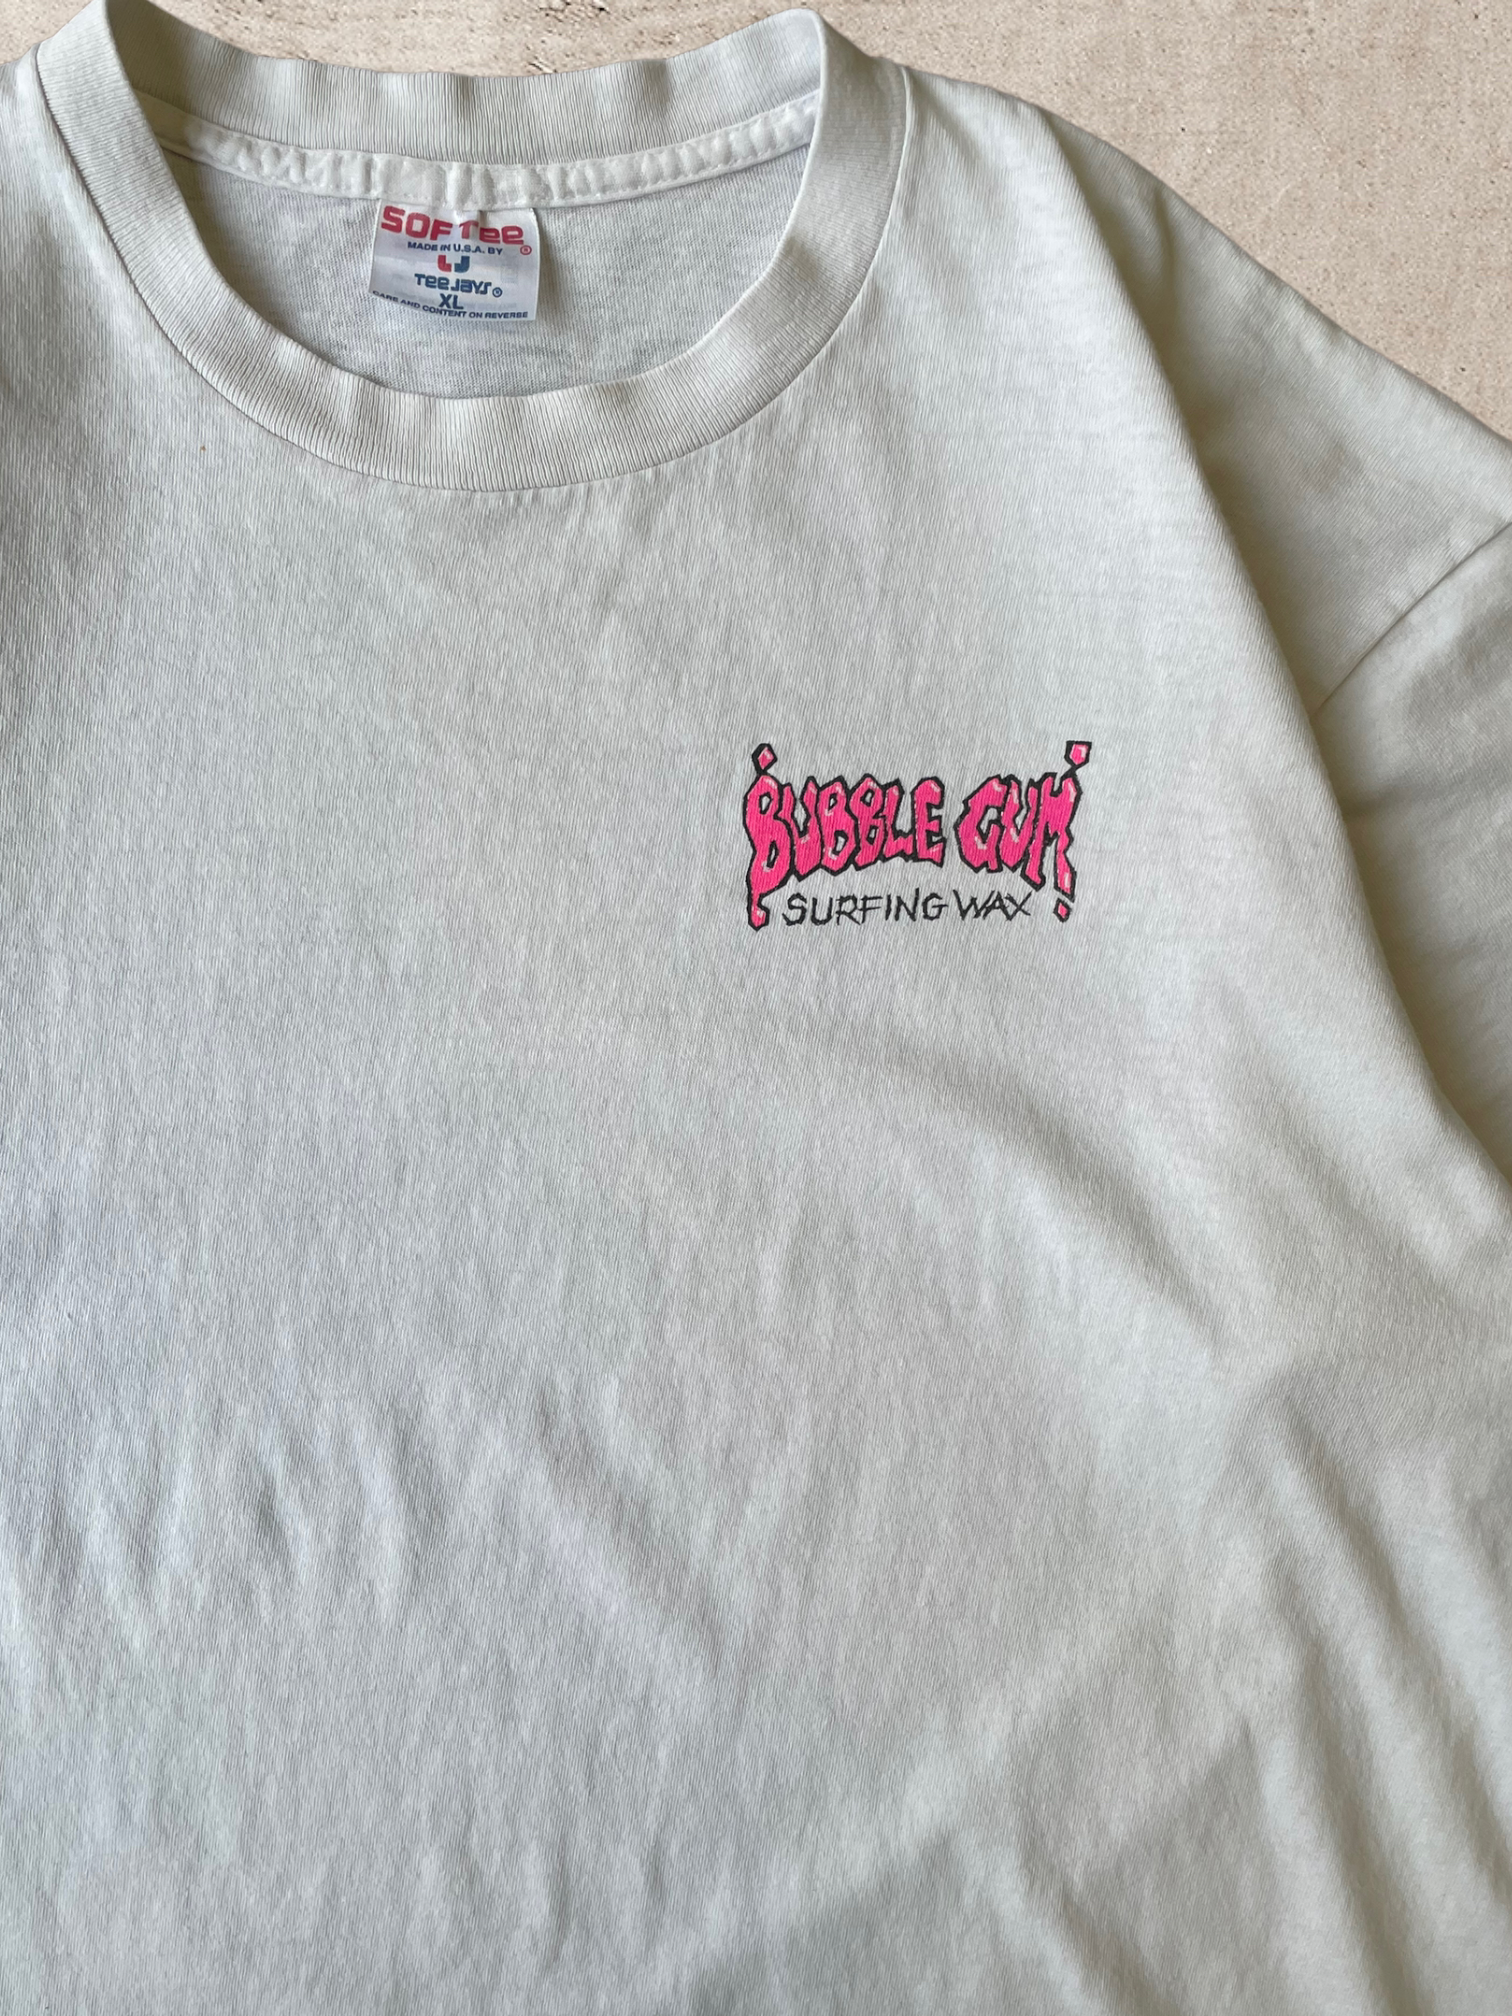 90s Just Blow Me Surf Wax T-Shirt - X-Large